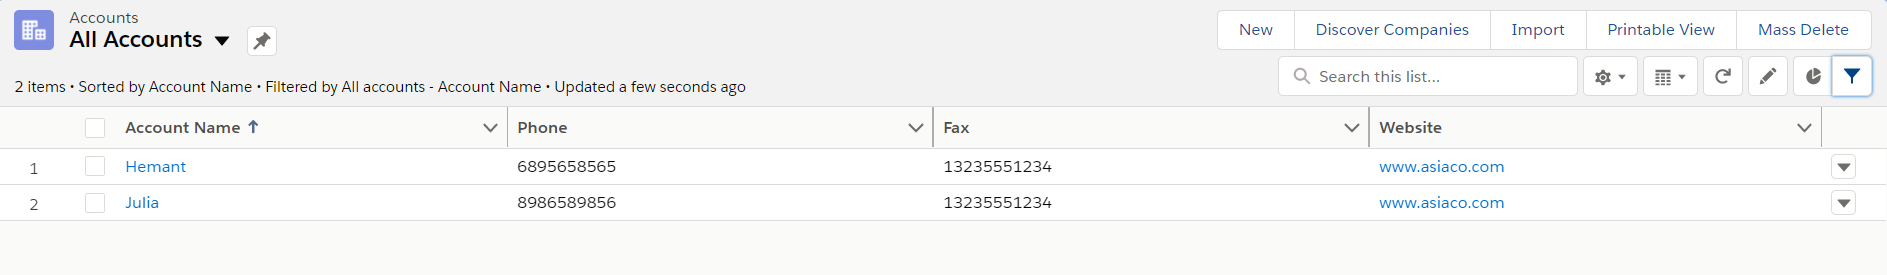 Created Records in Account Object